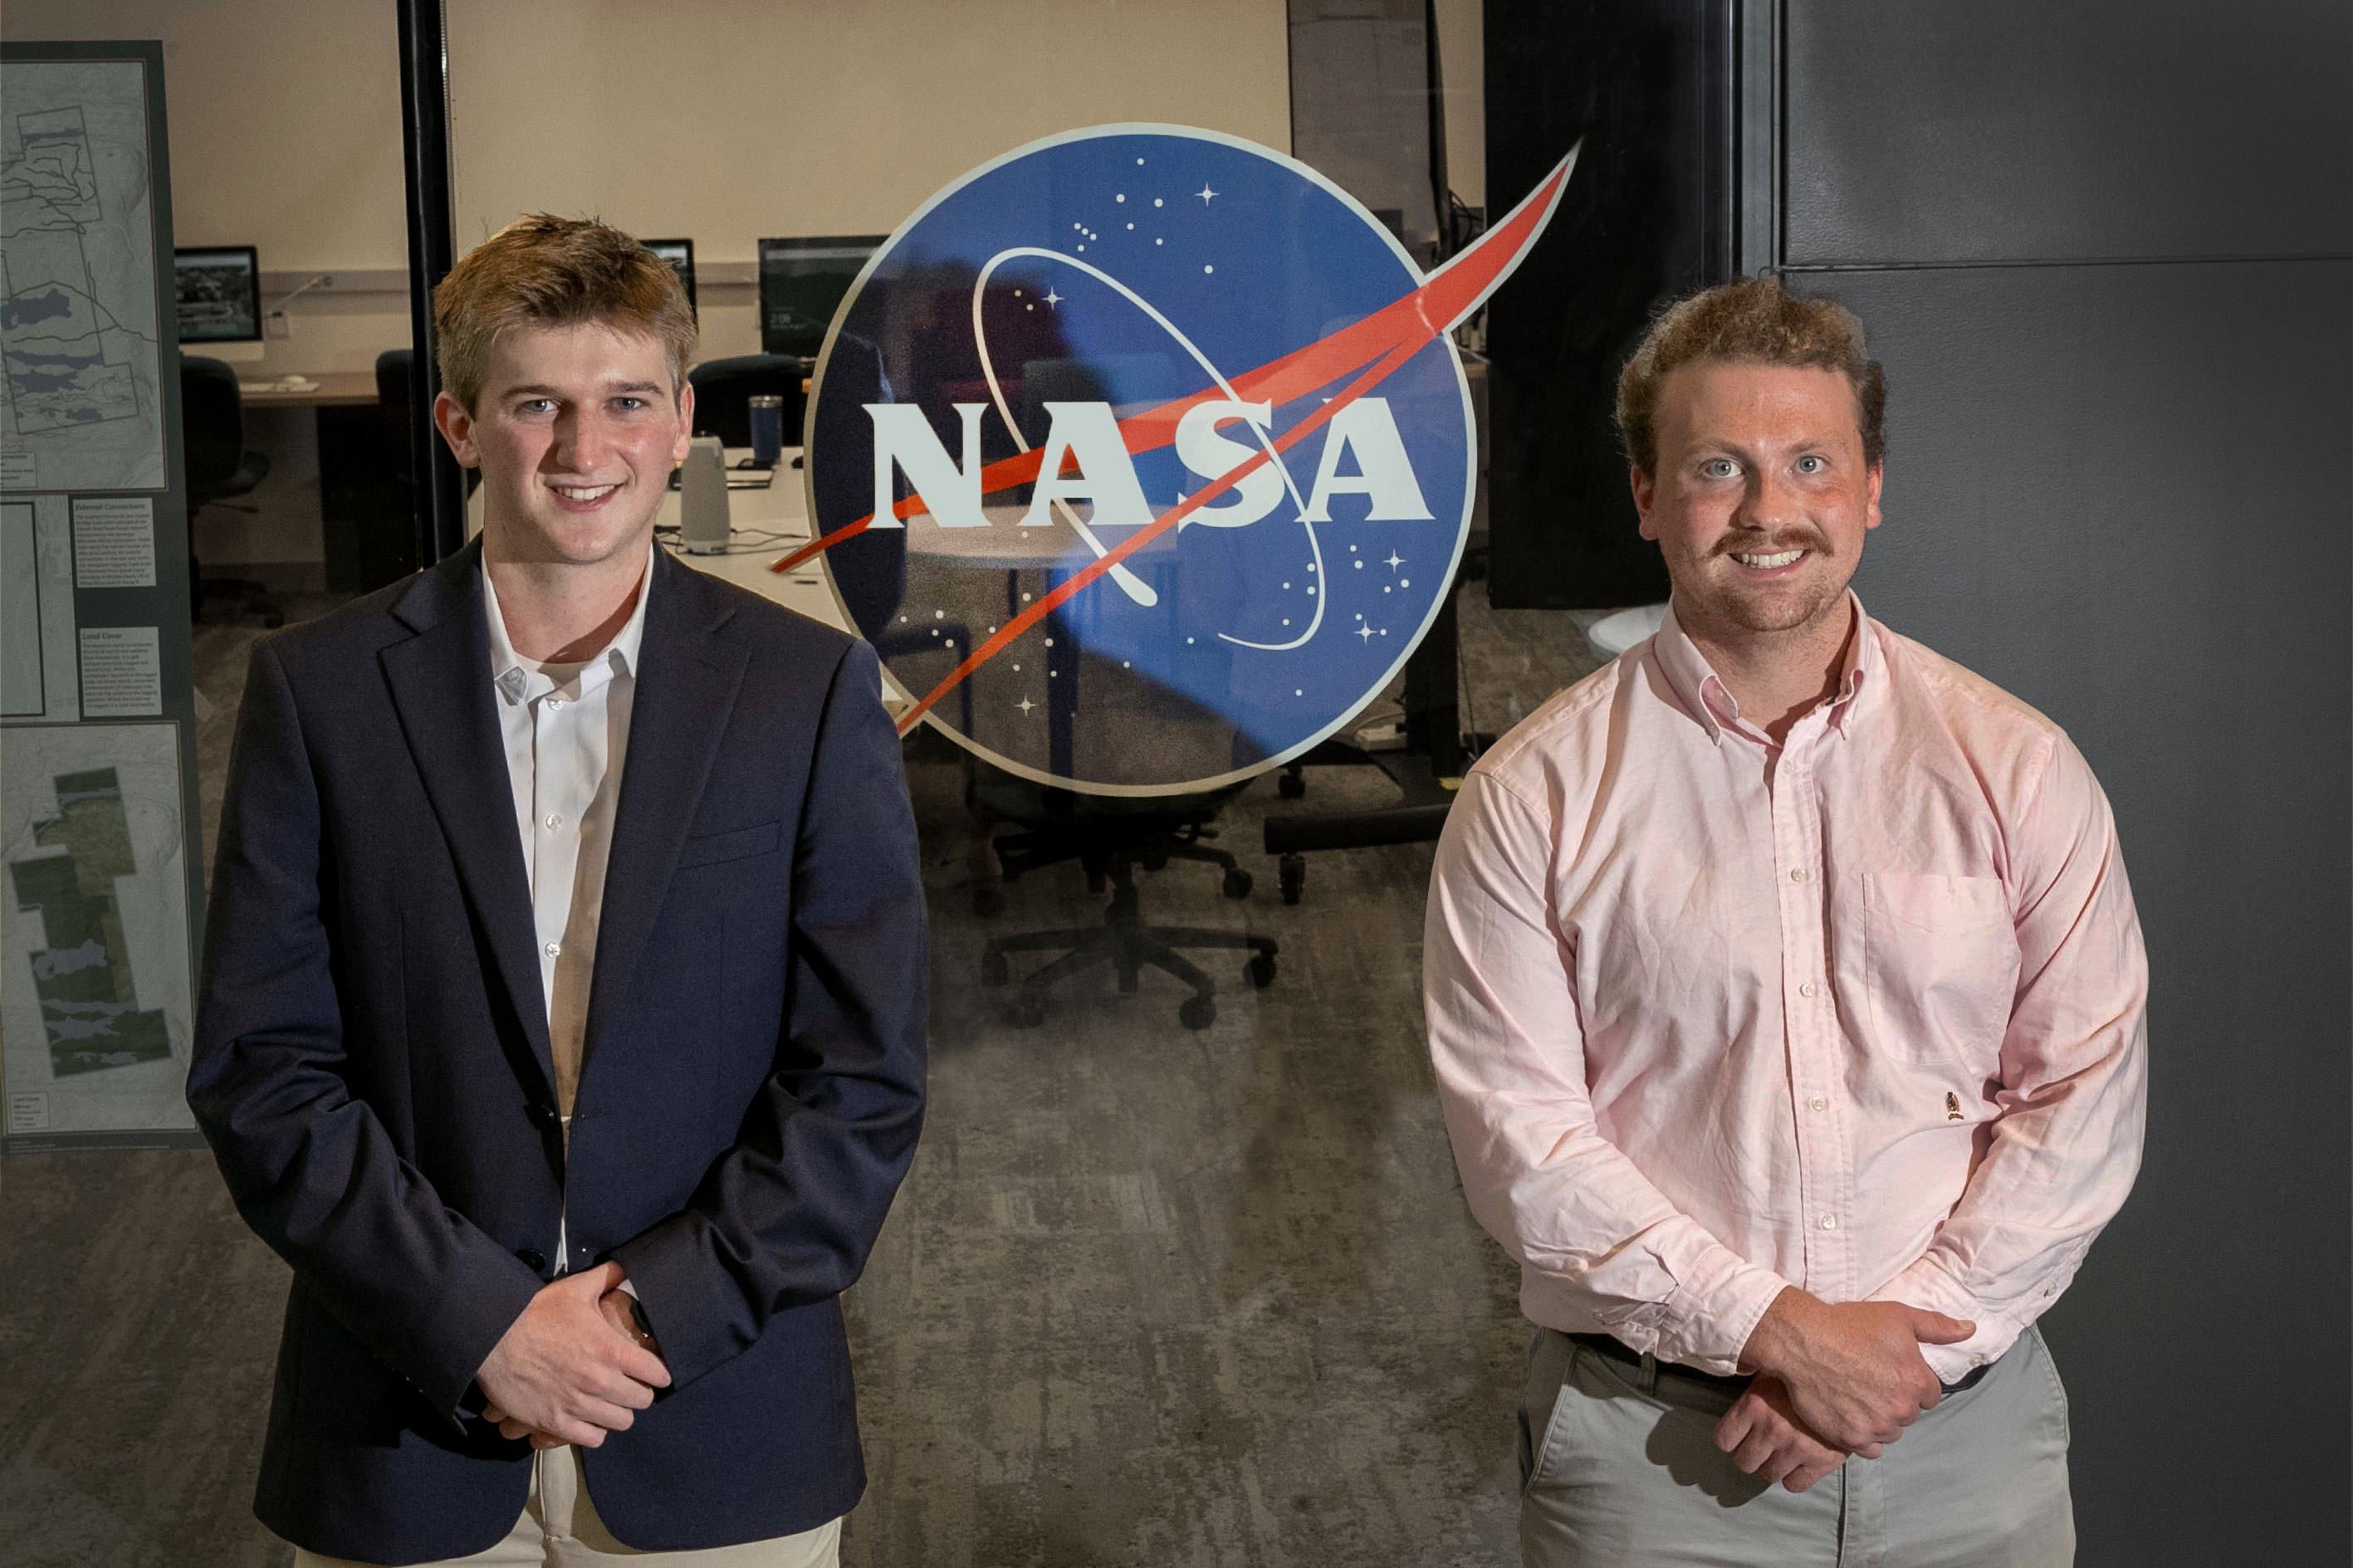 Skidmore College students Sam Haas '24 and Oliver Wilson '23 stand in front of a NASA sign in the Billie Tisch Center for Integrated Sciences